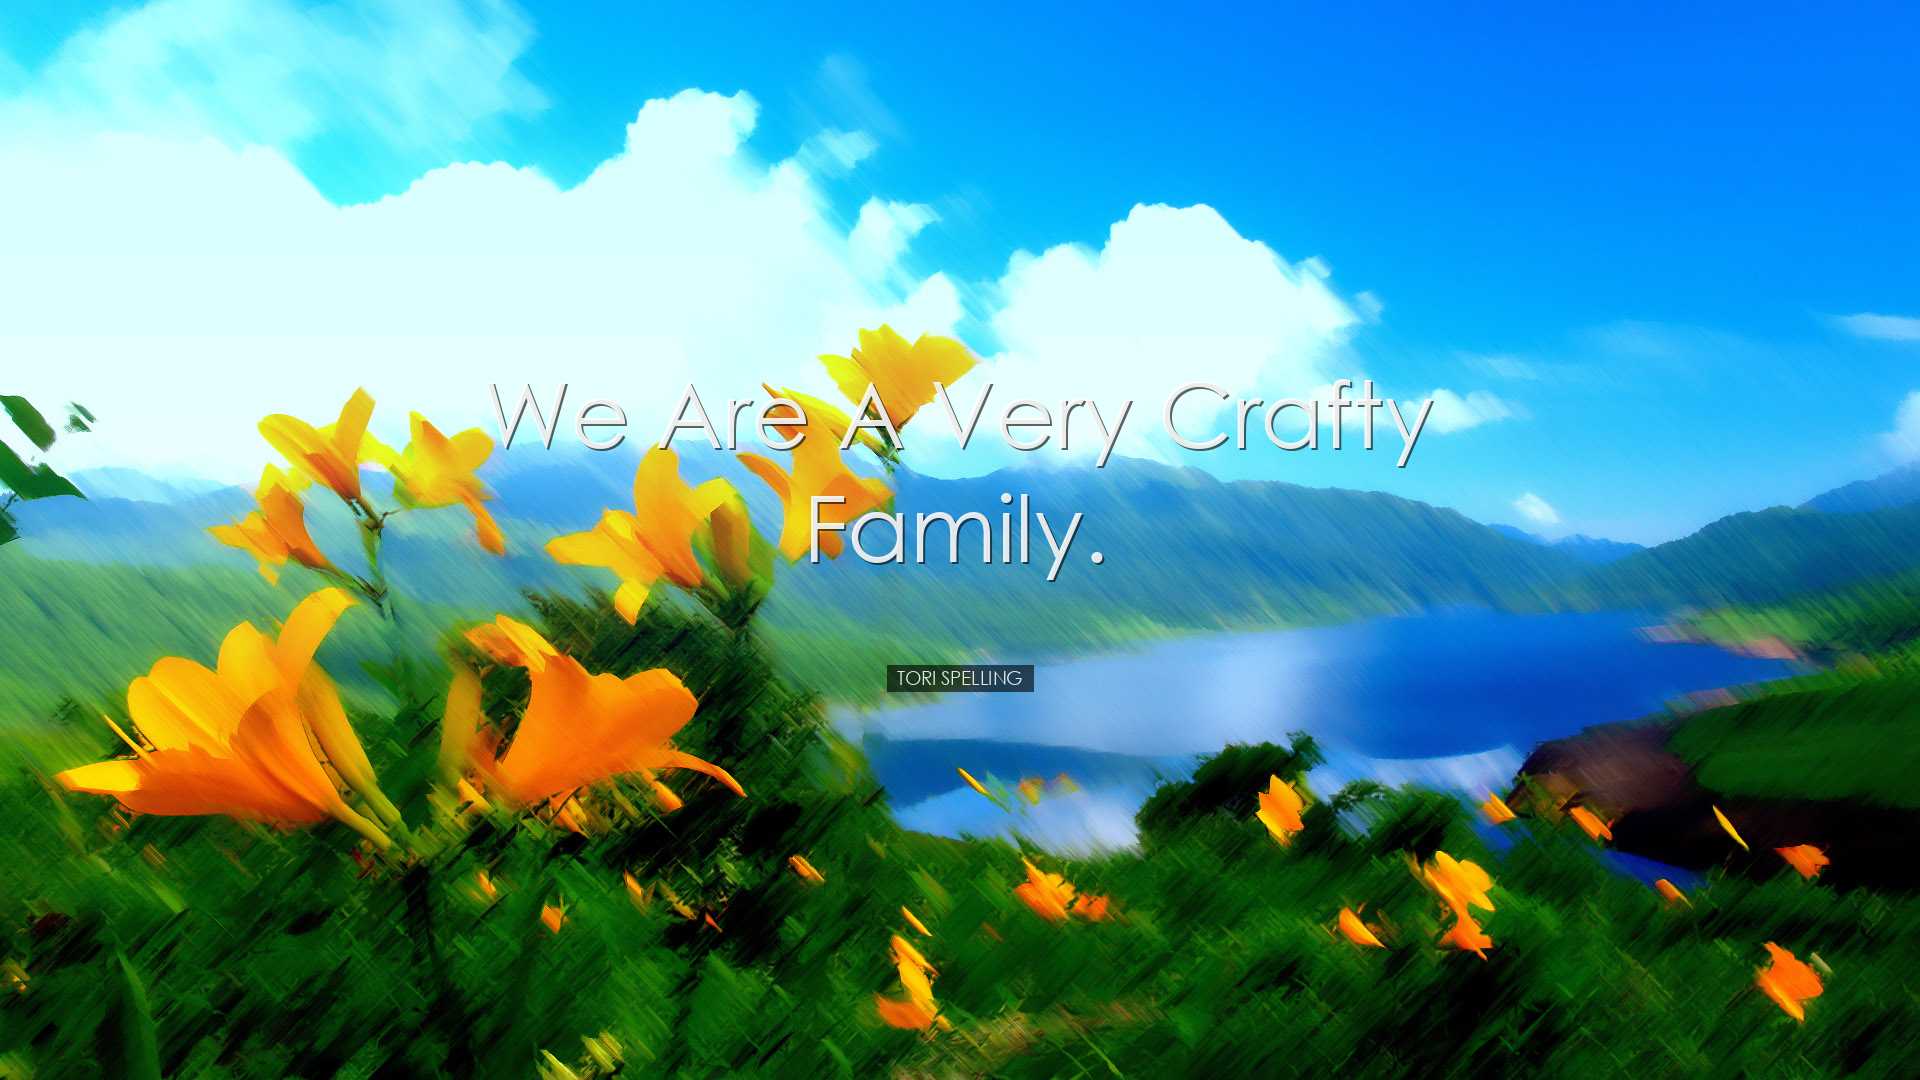 We are a very crafty family. - Tori Spelling